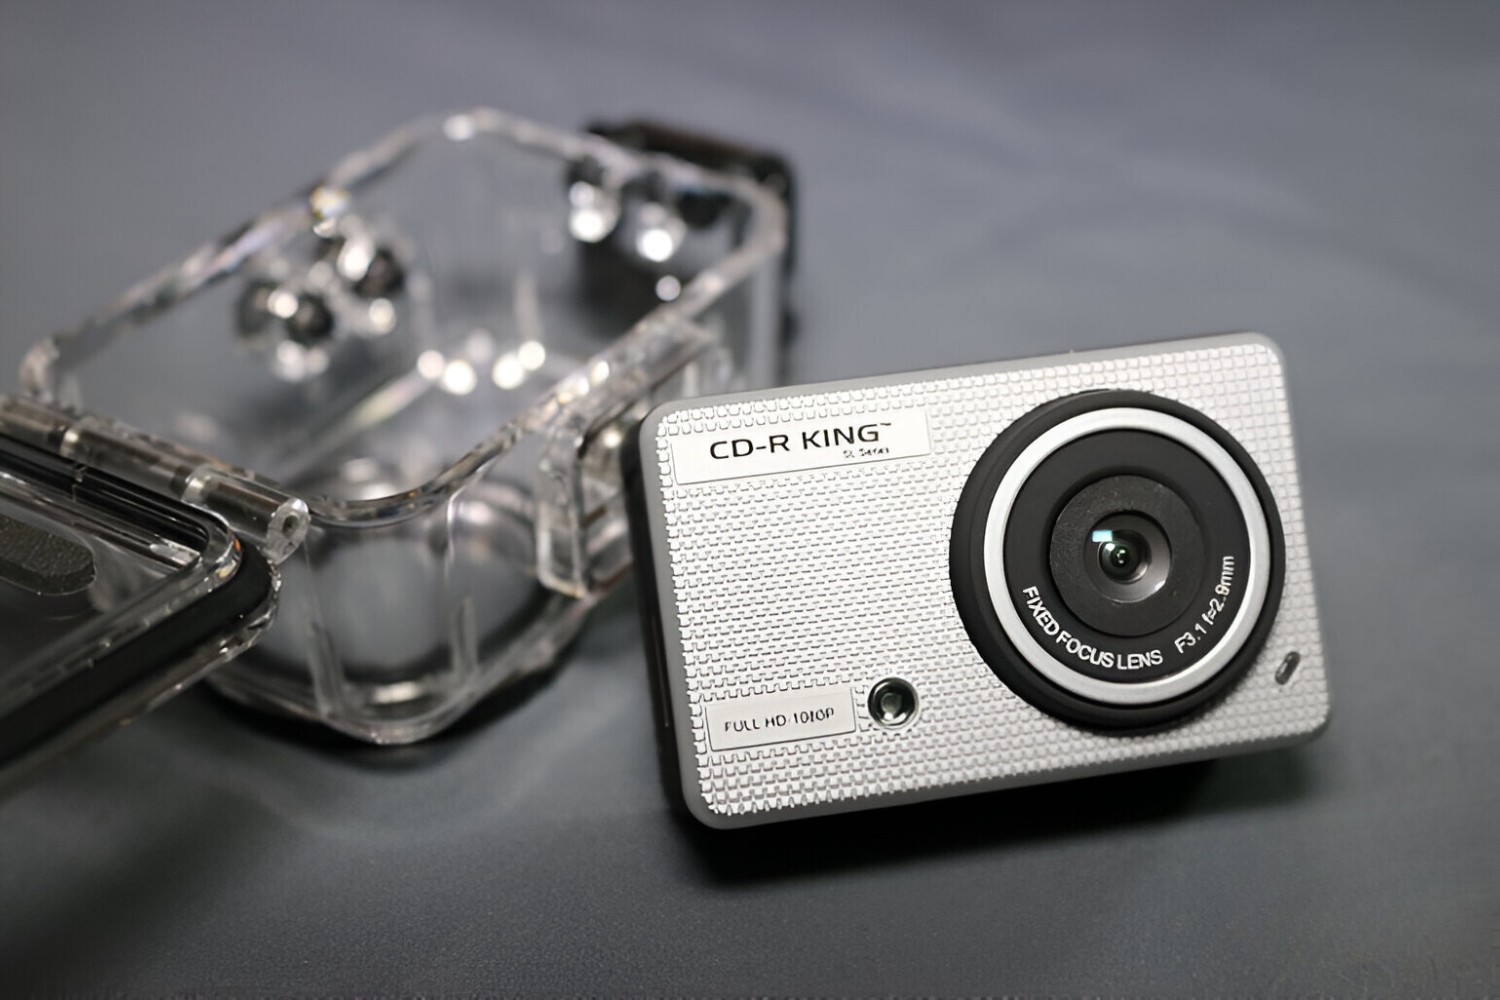 What Apps Can I Use For CD-R King Action Camera